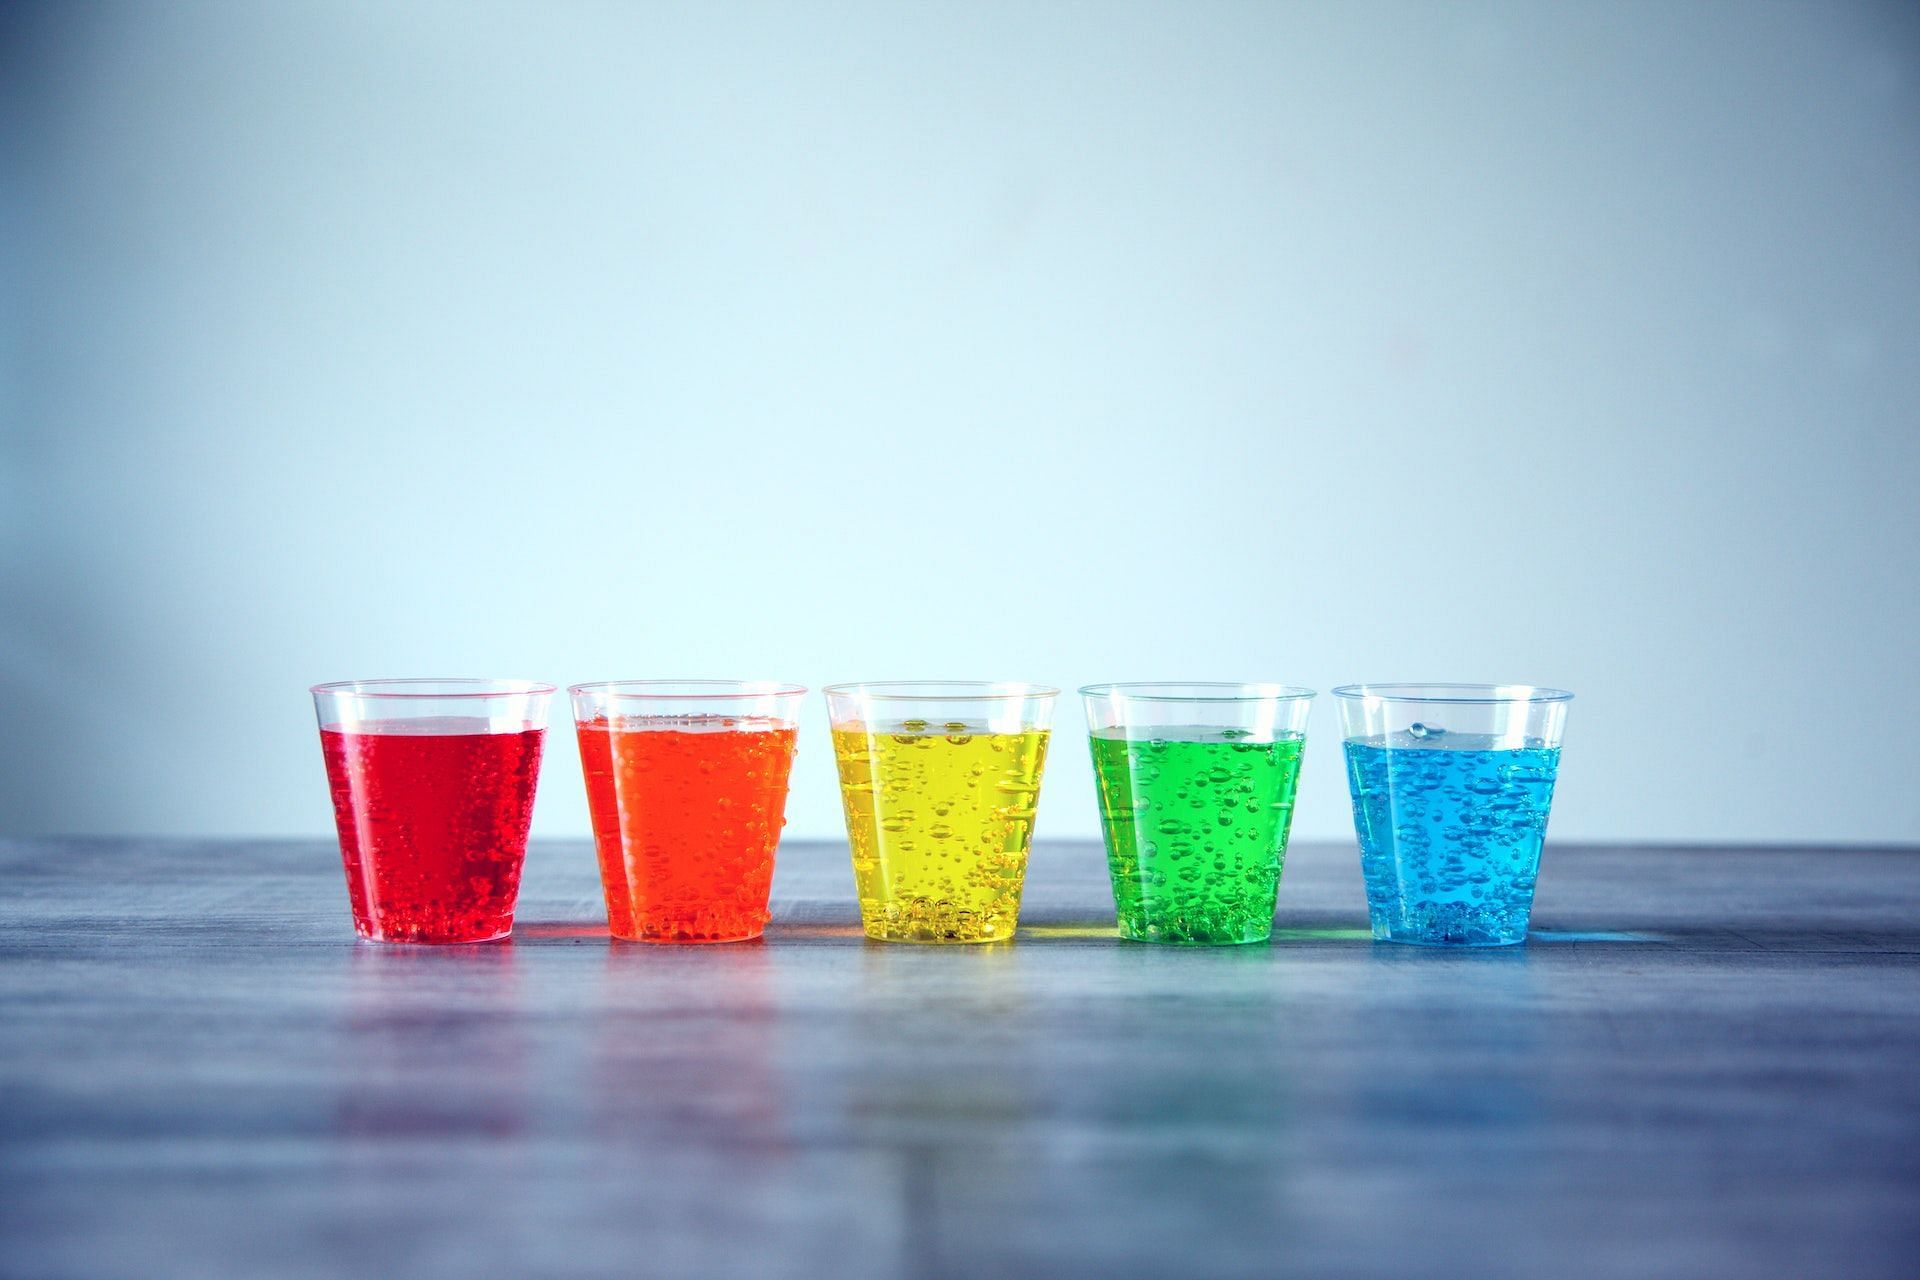 Limit sugar-sweetened beverages to reduce stress belly. (Photo via Pexels/Alexander Grey)